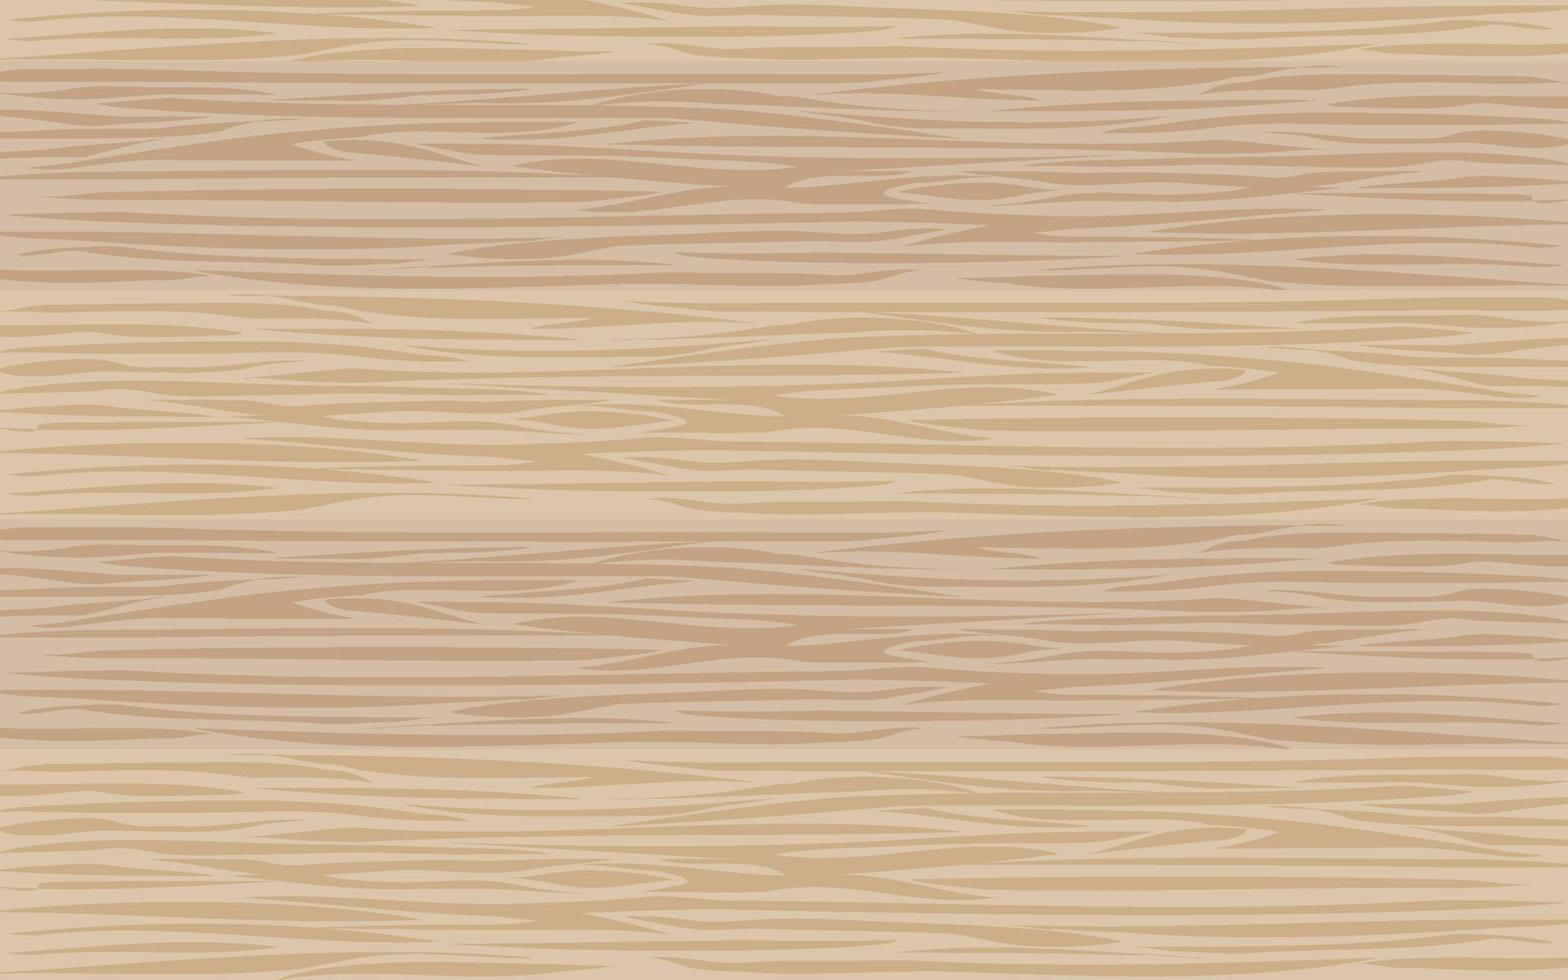 Light wood background. Texture of light brown wooden planks. vector